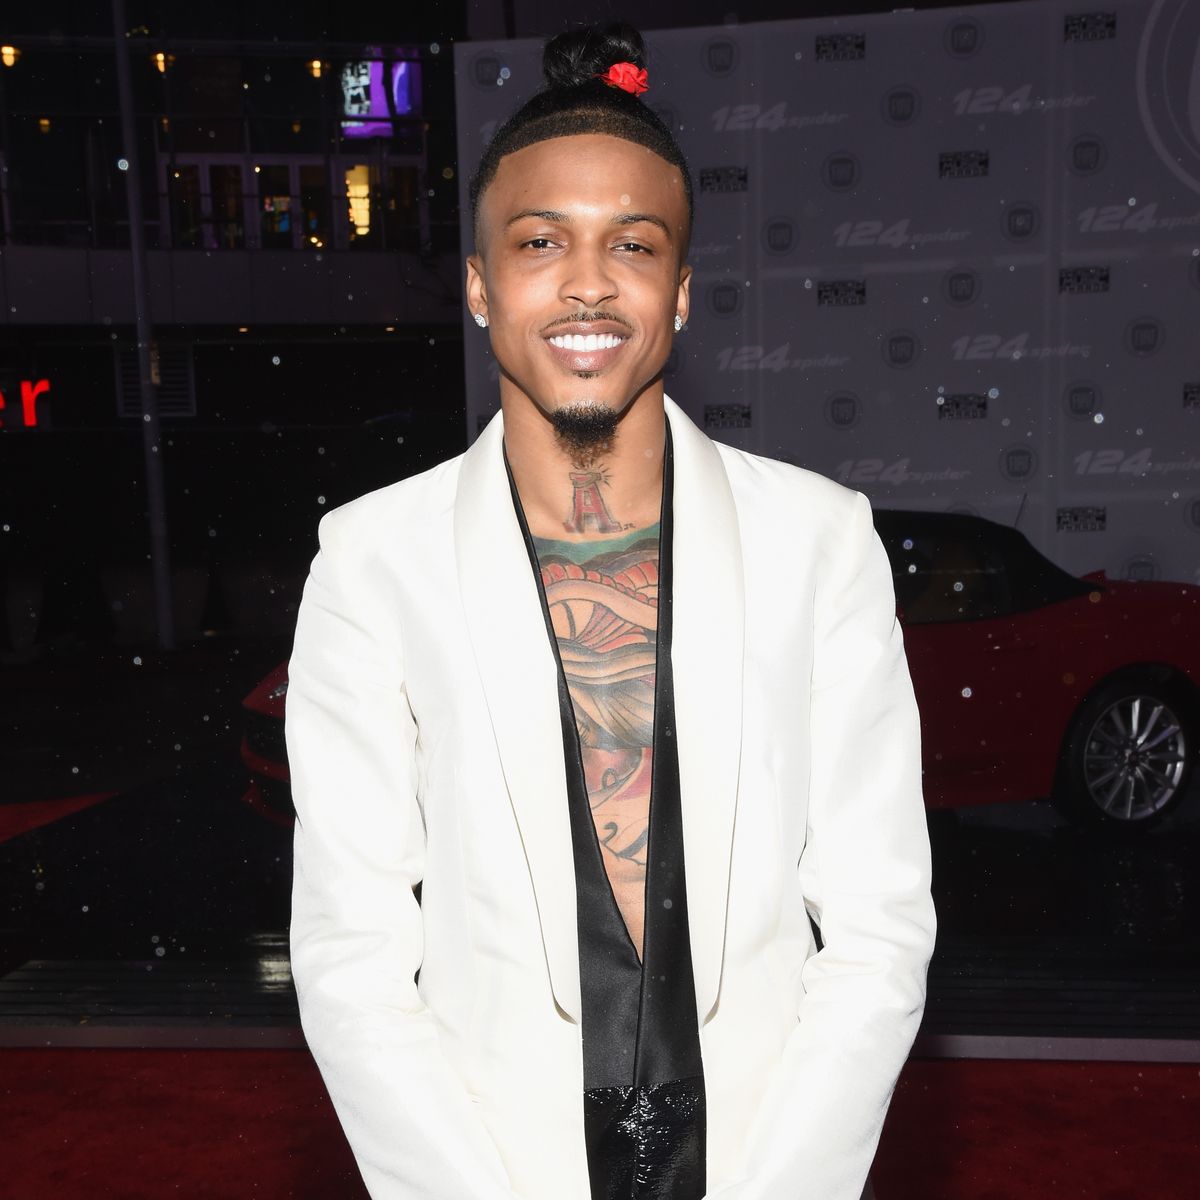 los angeles, ca   november 20  rapper august alsina attends the 2016 american music awards red carpet arrivals sponsored by fiat 124 spider at microsoft theater on november 20, 2016 in los angeles, california  photo by michael kovacama2016getty images for fiat